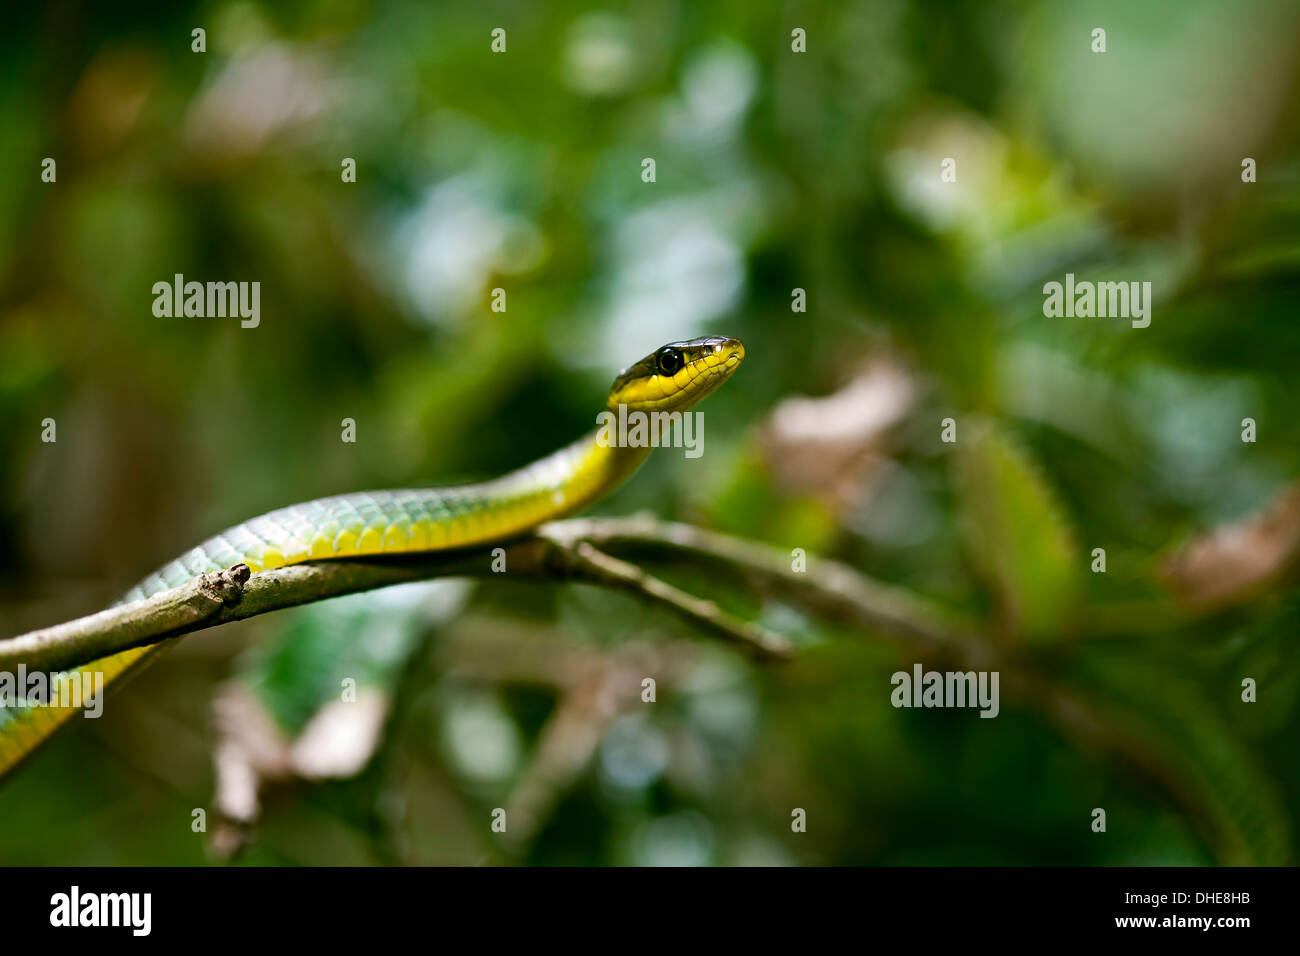 A green tree snake sliding over a branch in a rain forest setting. Stock Photo